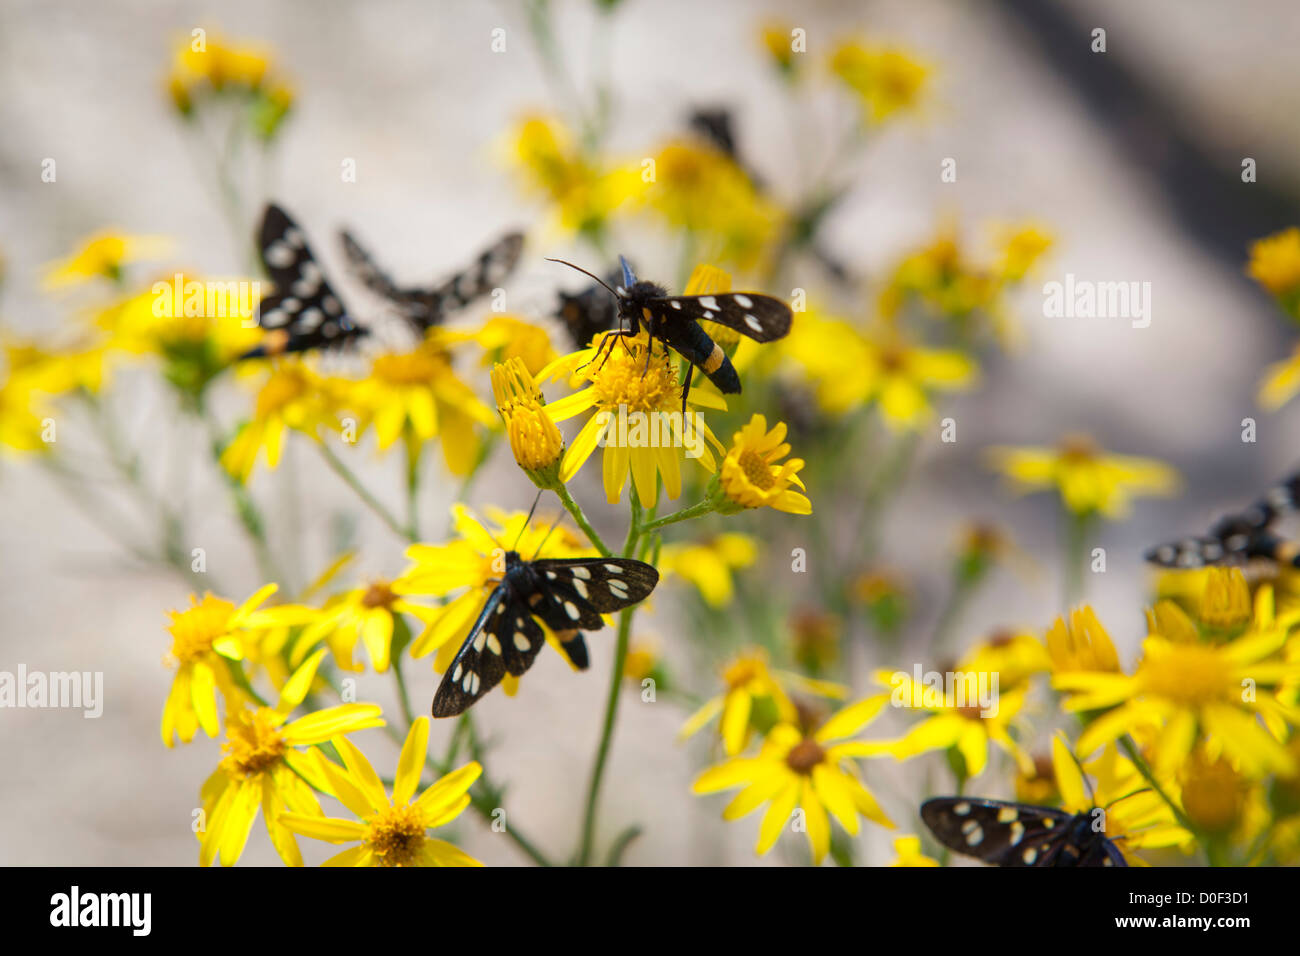 Phegea butterflies nine-spotted moth on yellow flowers at Strabrechtse Heide in the Netherlands Stock Photo